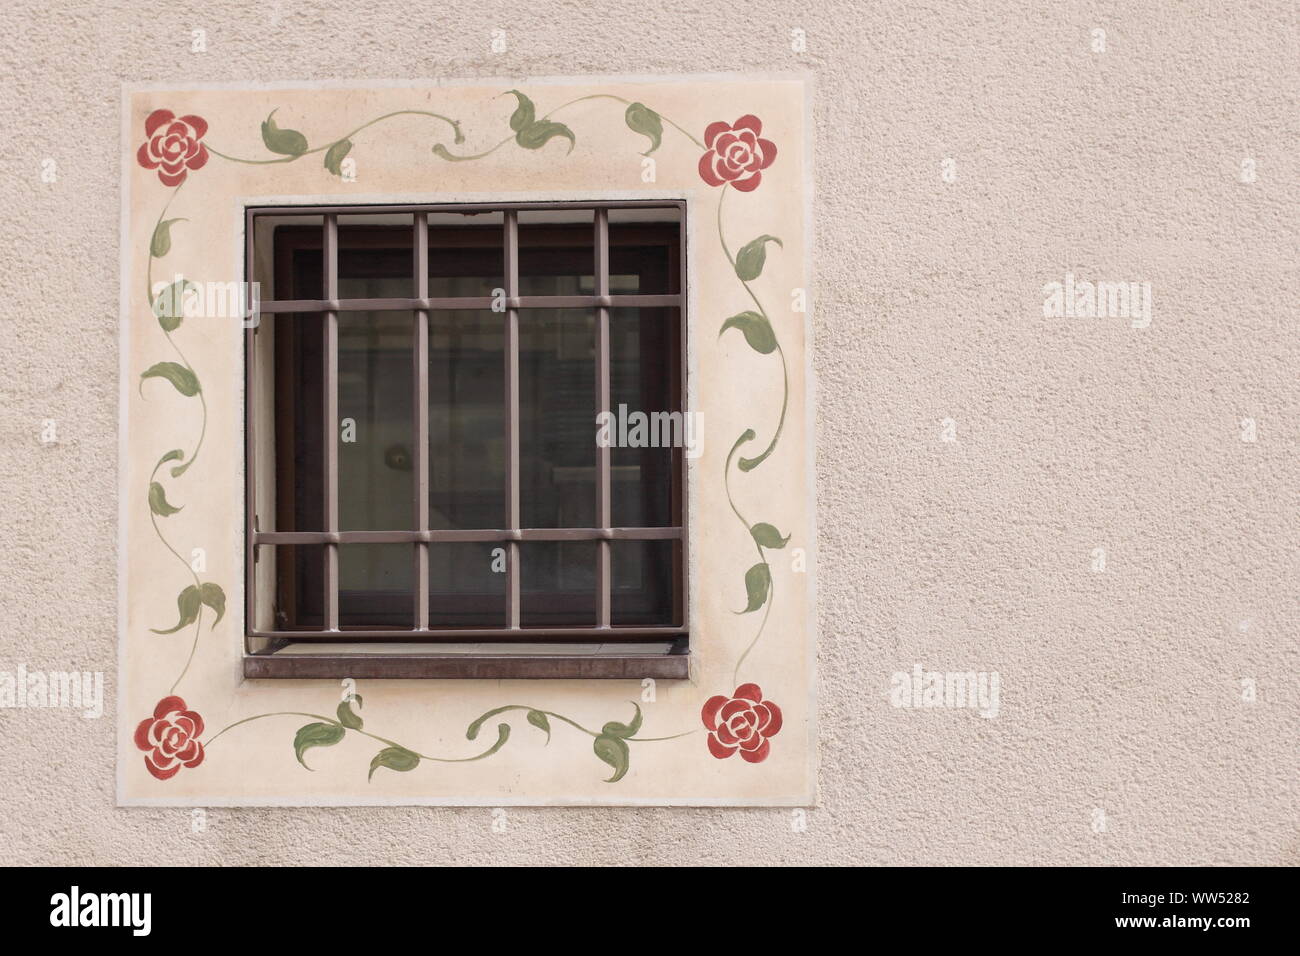 A decorated lattice window at a wall of a house, Stock Photo